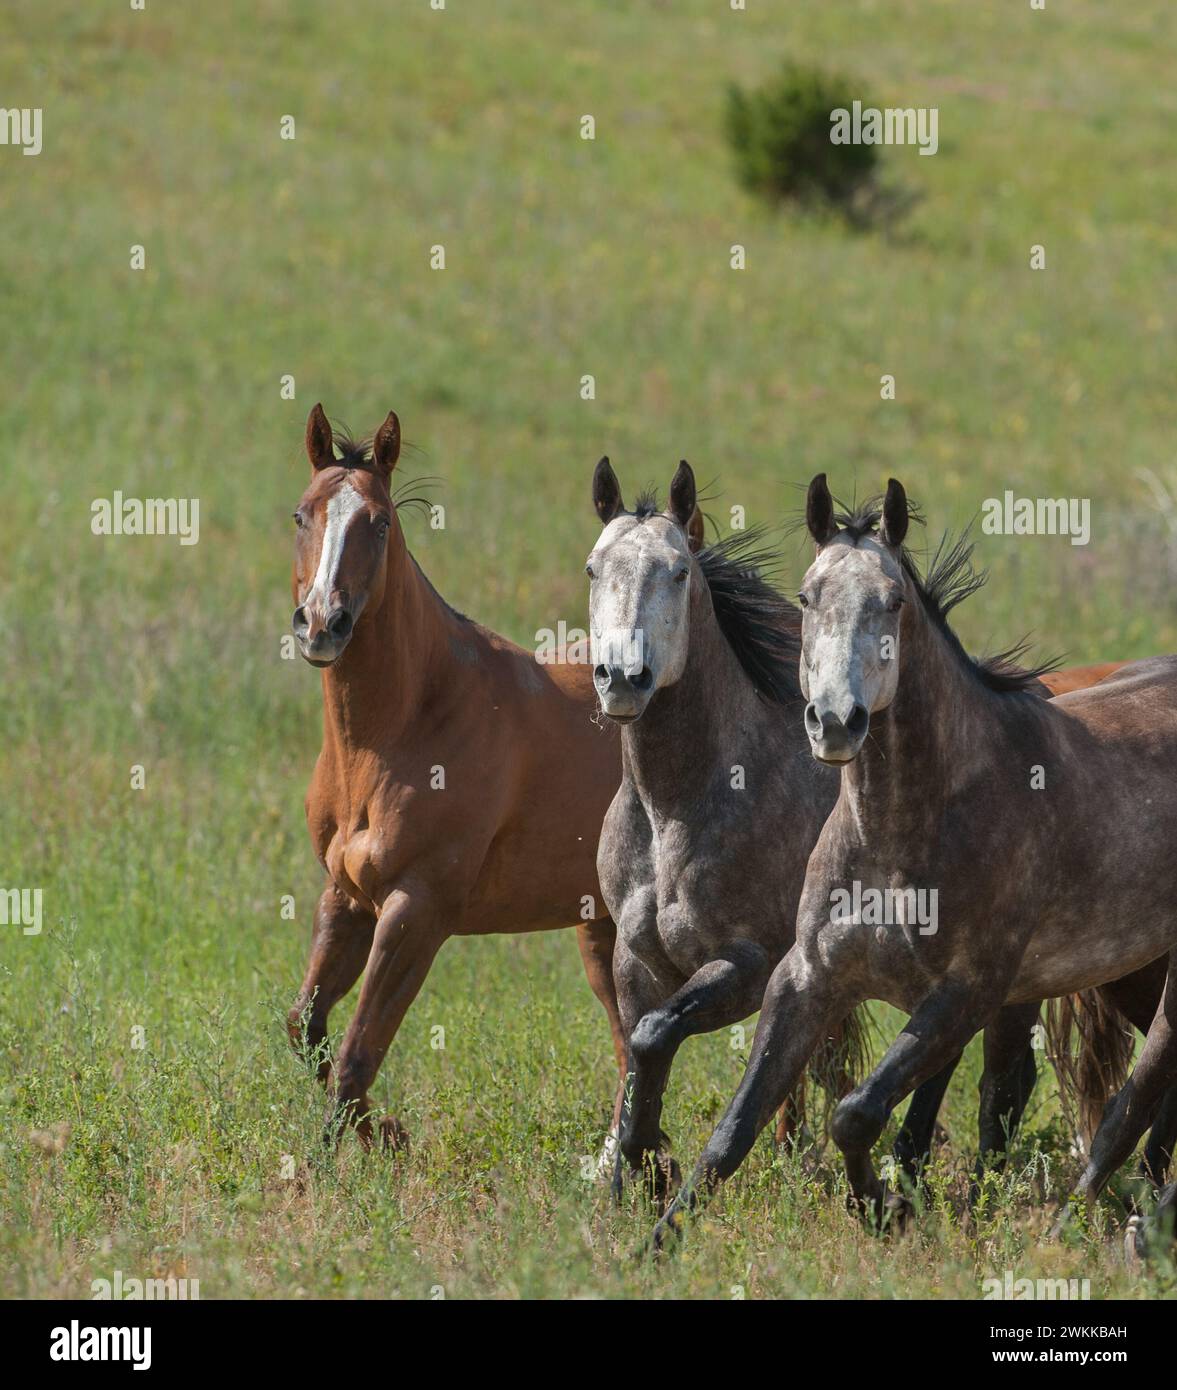 Three horses two greys and one bay with white blaze running towards camera with all ears up in green summer pasture vertical equine image room for mas Stock Photo